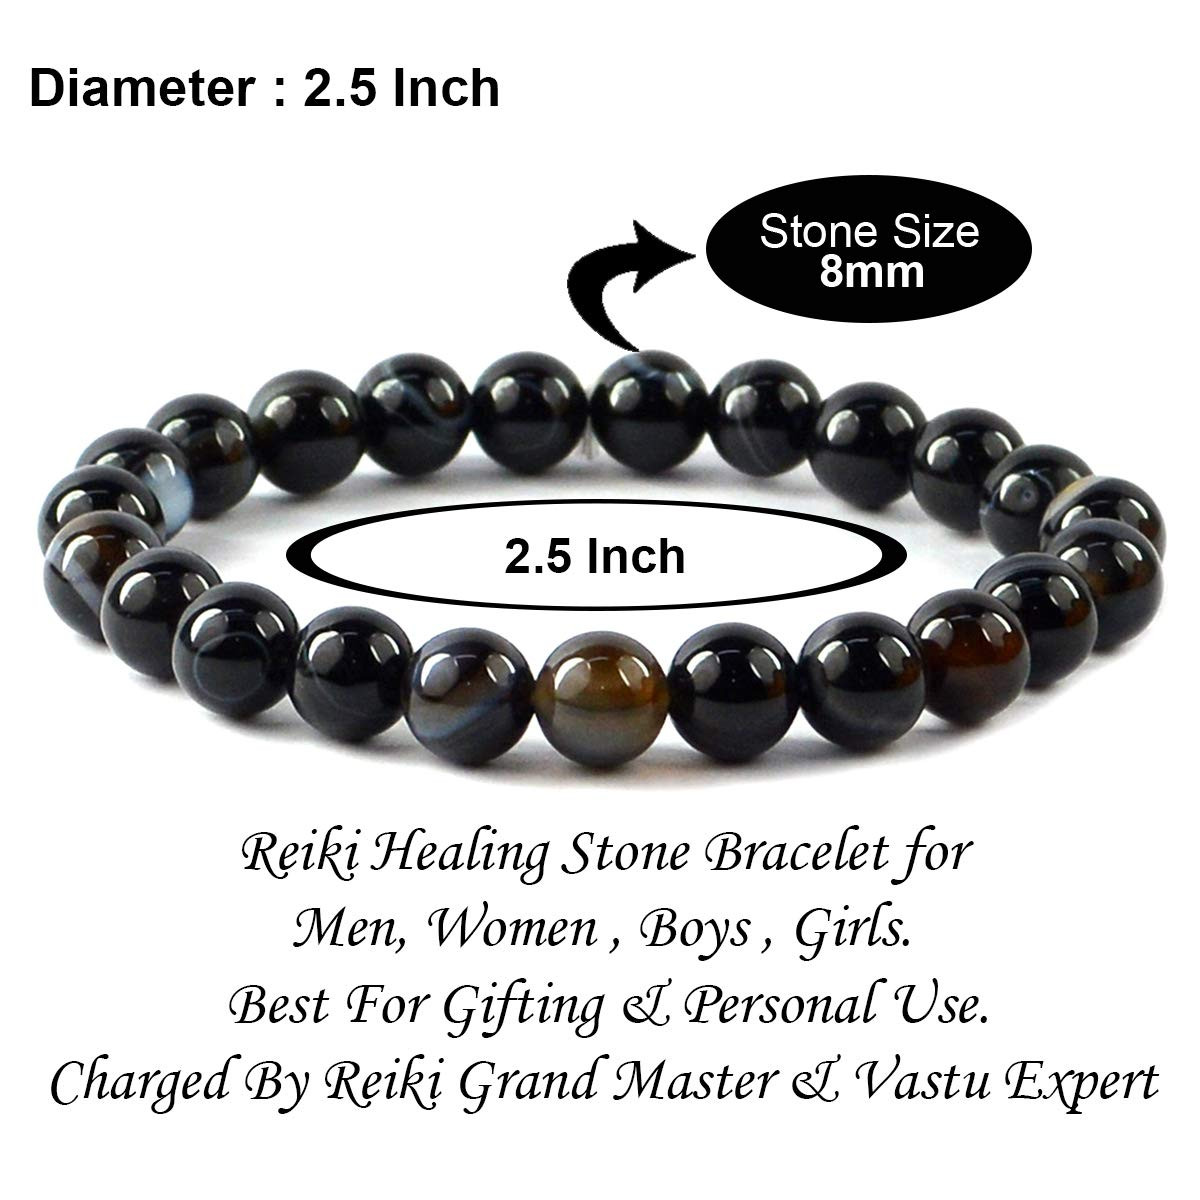 Buy Strength and Grounding Miracle Black Sulemani Hakik Bracelet Online  From Premium Crystal Store at Best Price - The Miracle Hub